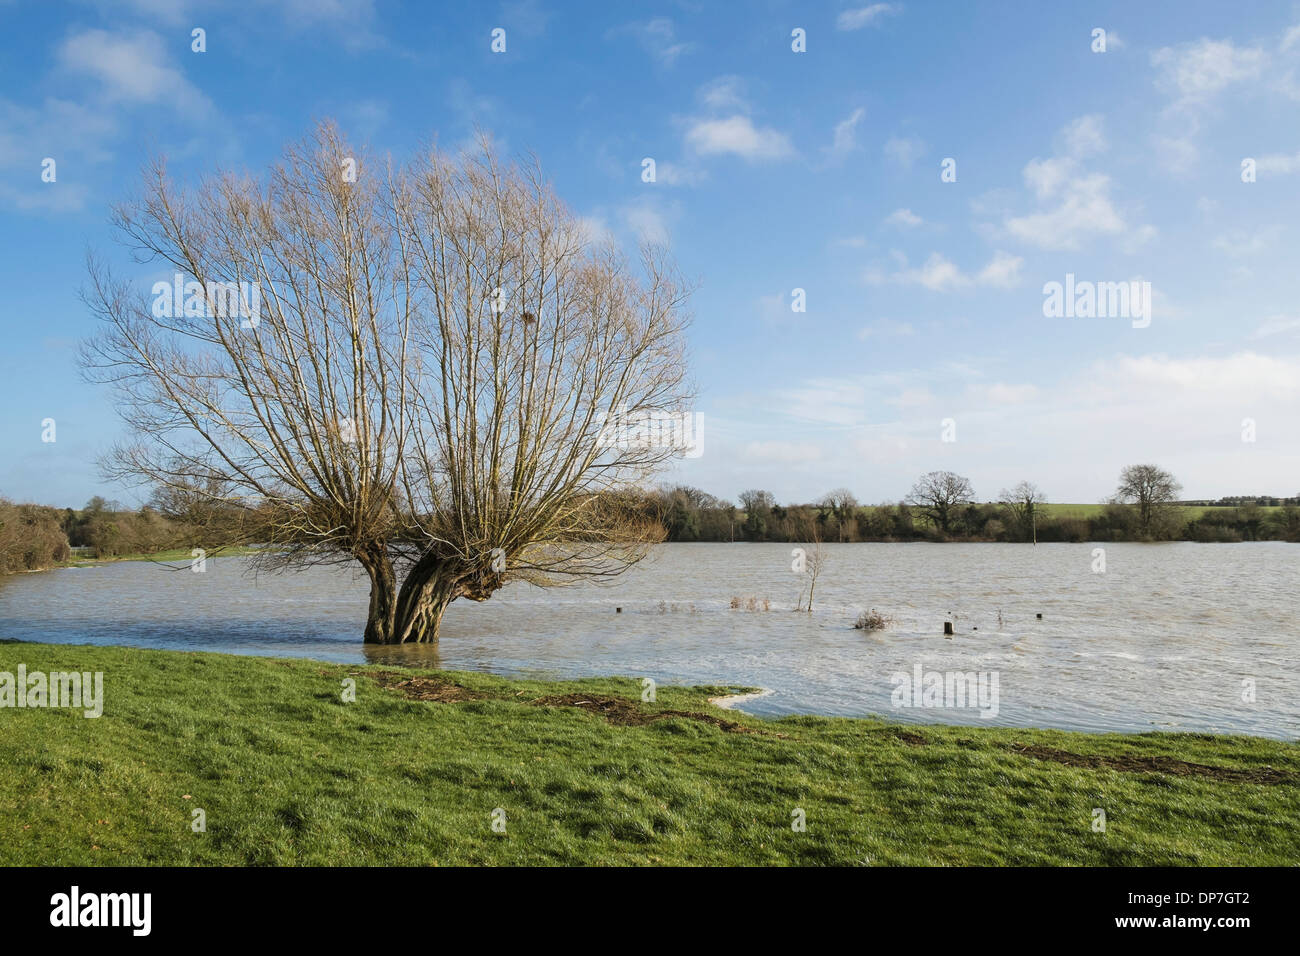 Willow tree in flooded field Cherwell Valley Oxfordshire England UK Stock Photo